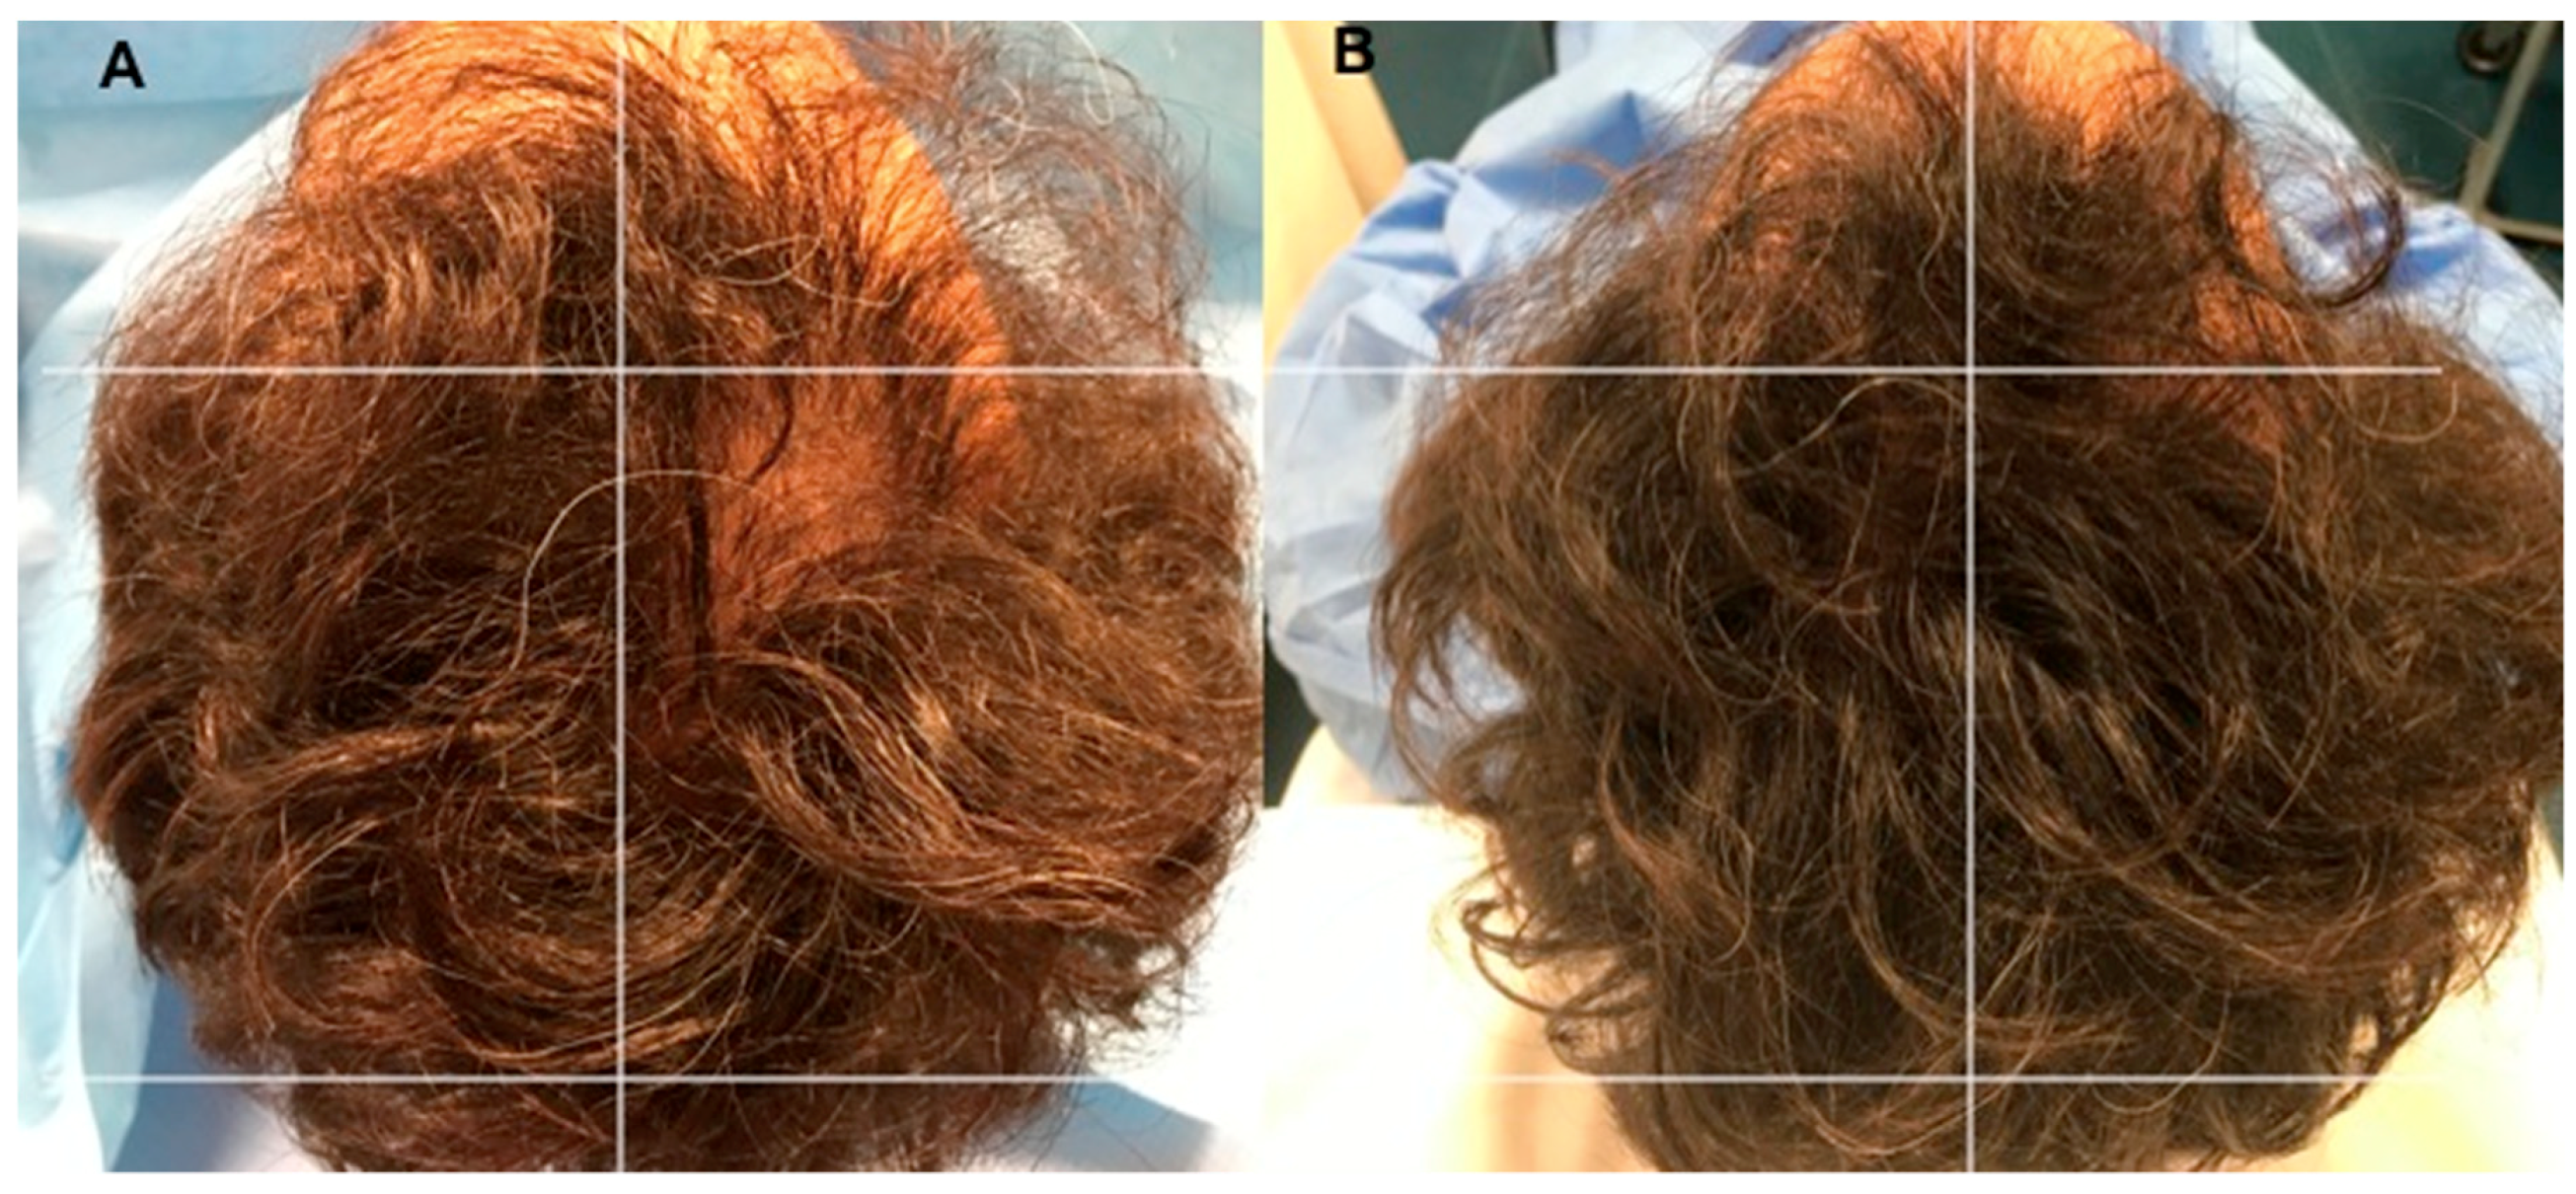 Biomedicines | Free Full-Text | Platelet-Rich Plasma and Micrografts  Enriched with Autologous Human Follicle Mesenchymal Stem Cells Improve Hair  Re-Growth in Androgenetic Alopecia. Biomolecular Pathway Analysis and  Clinical Evaluation